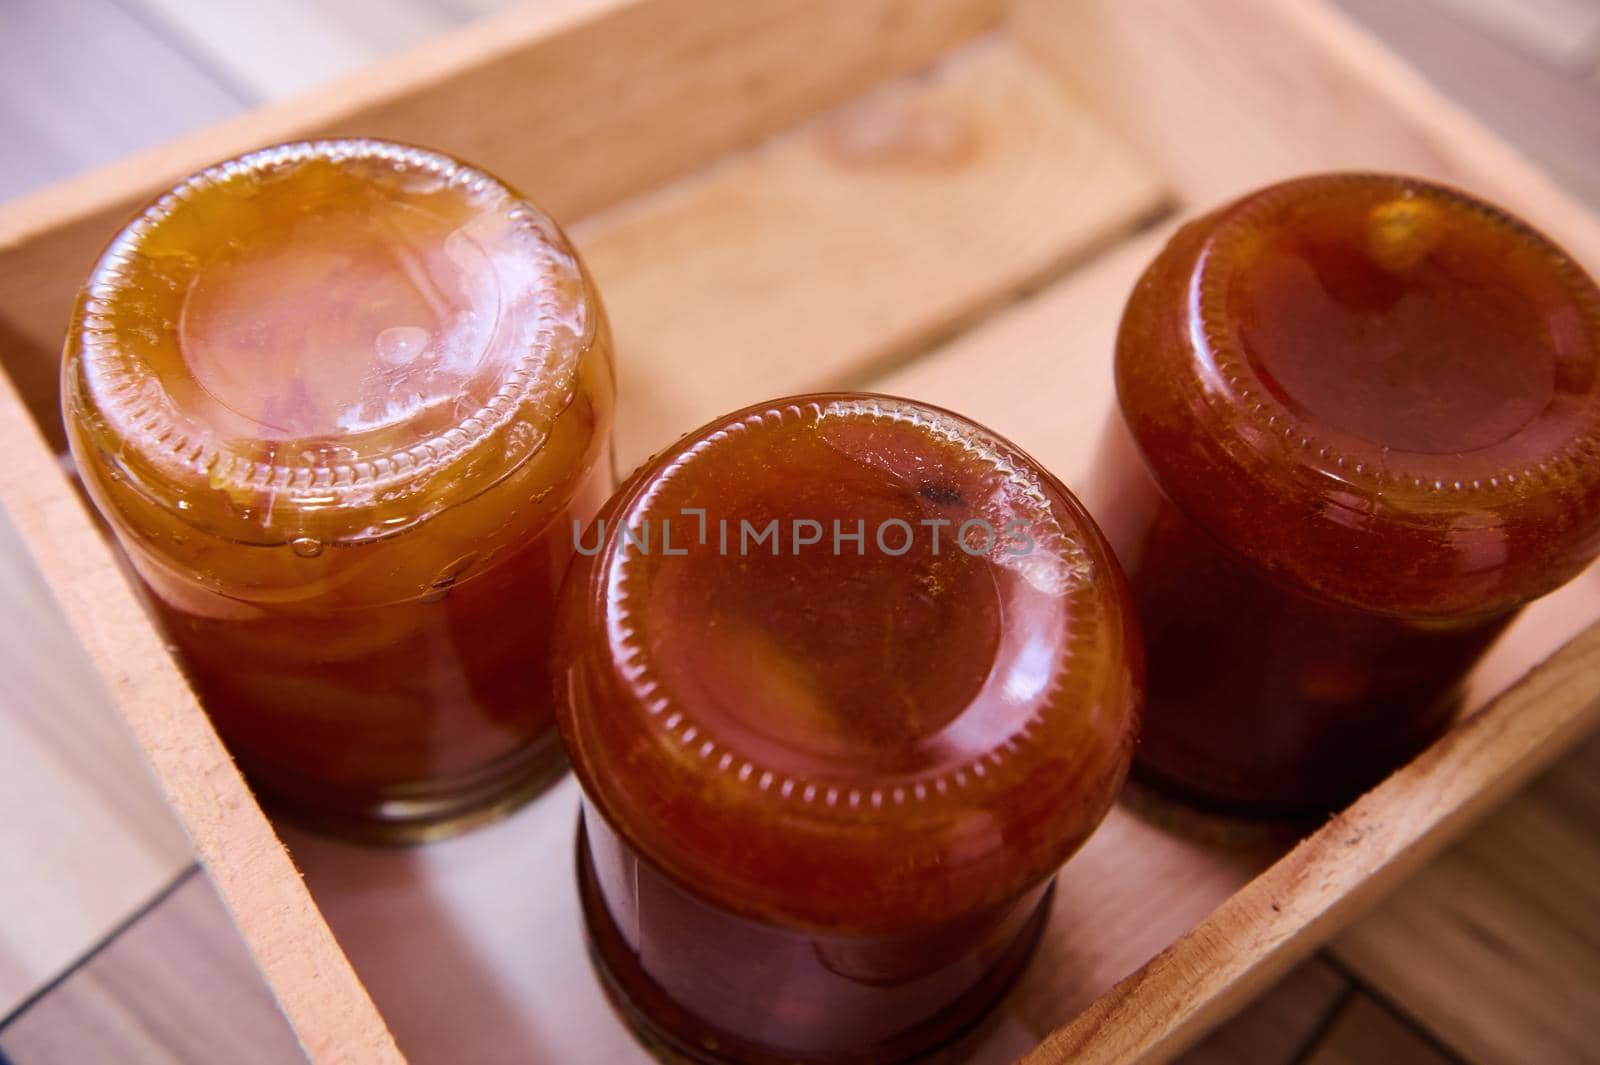 Top view of homemade apricot jam with pits and canned peach slices in glass jars upside down on wooden crate. Copy space by artgf